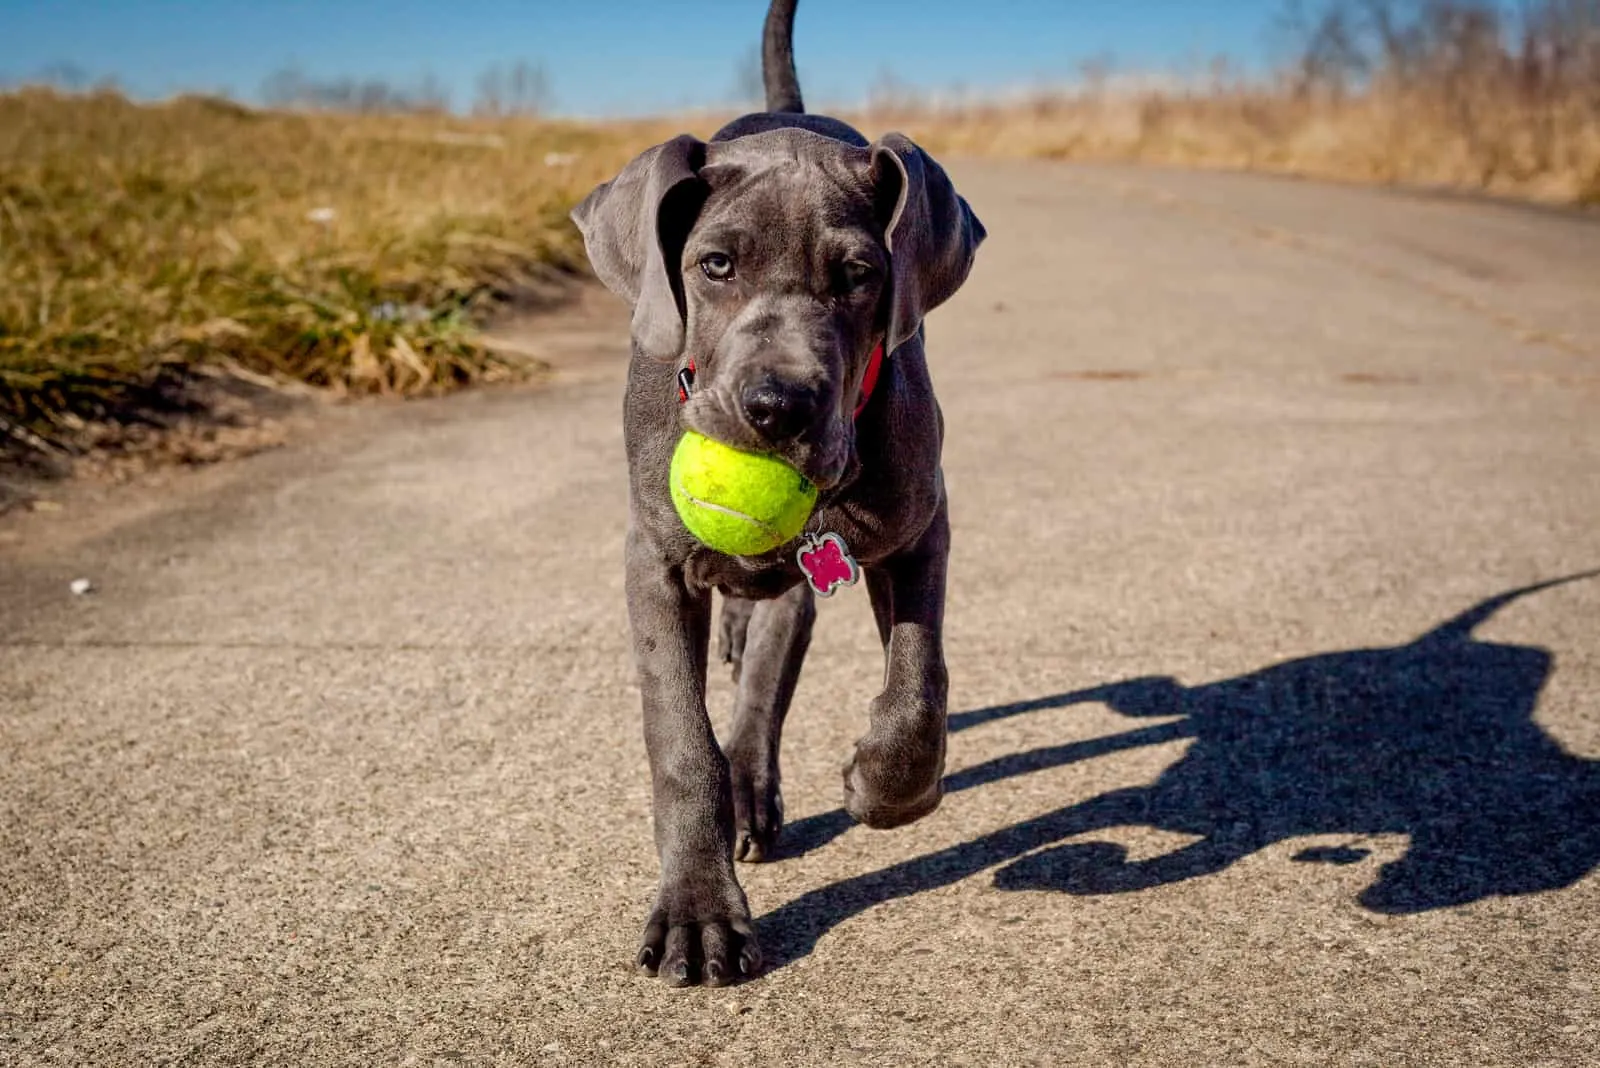 An adorable great Dane puppy carrying a tennis ball in its mouth